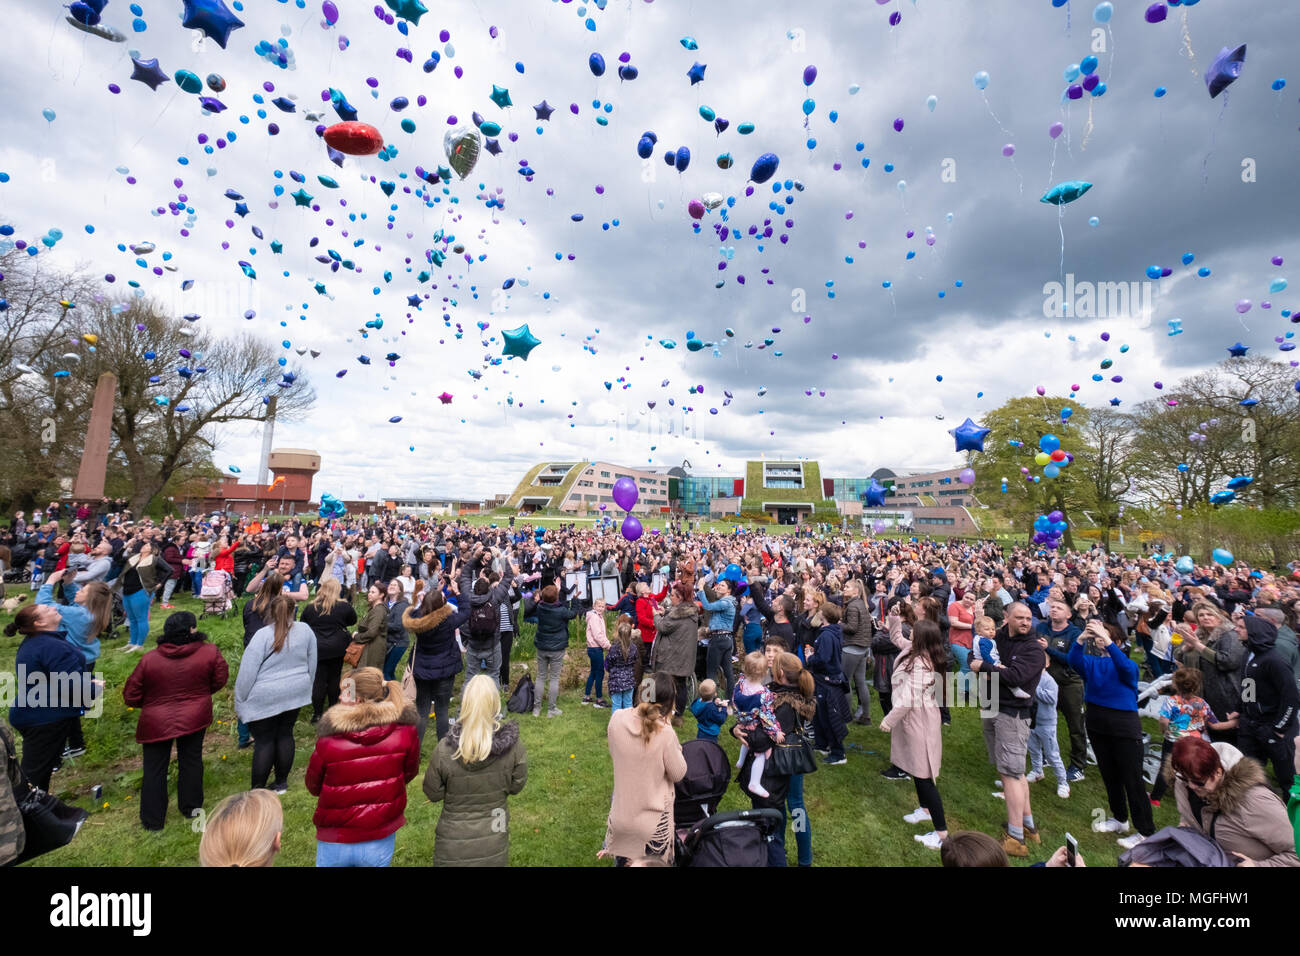 Liverpool, UK, 28 April 2018. Hundreds of people attended a balloon release and left tributes outside Alder Hey hospital on Saturday, April 28, 2018, for 23-month old Alfie Evans who has been at the centre of a long running legal row over his care. Following his life support machine being withdrawn, Alfie Evans died on Friday, April 27, 2018. Stock Photo